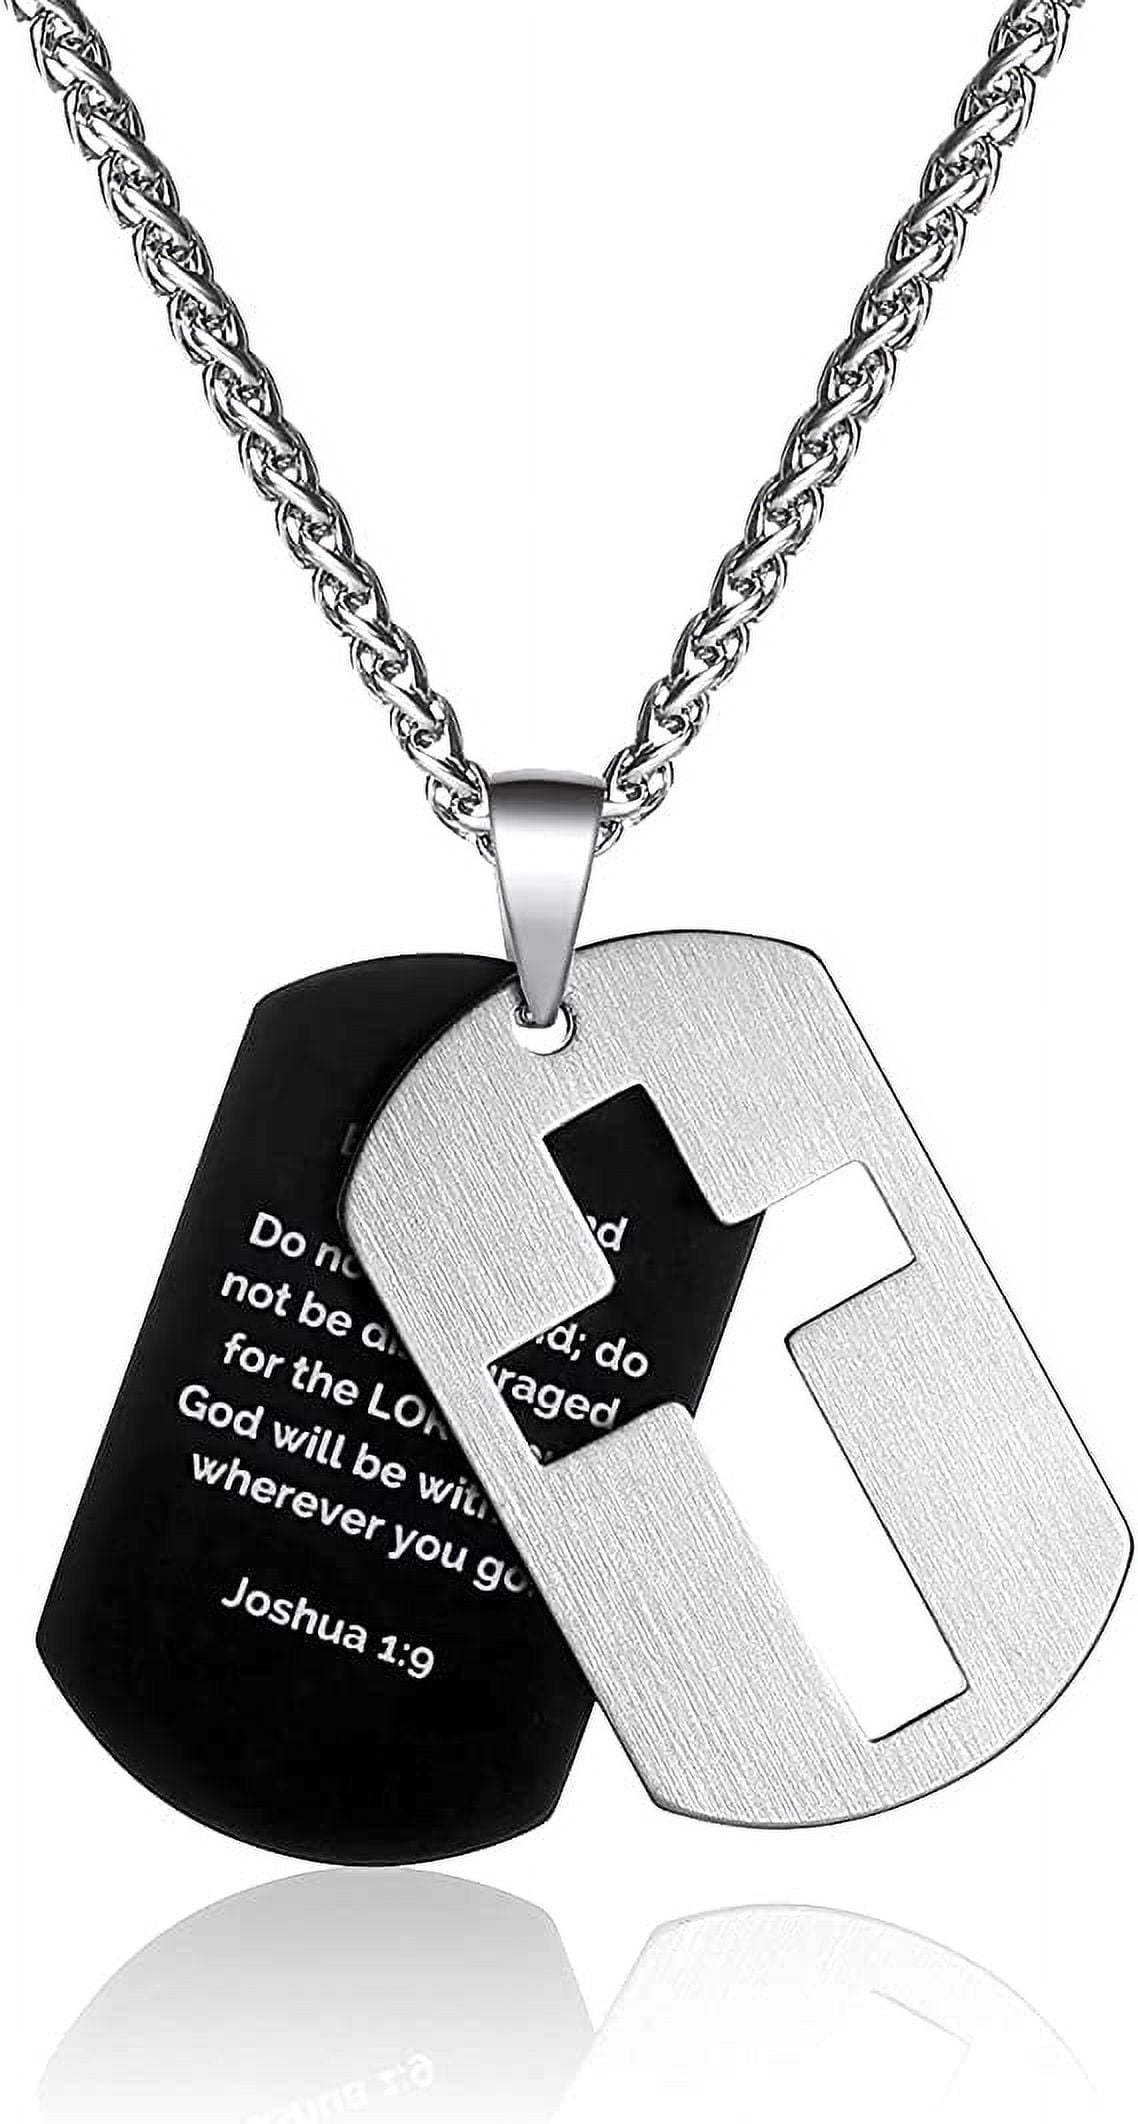 Dog Tag Pendant - Buy Dog Tag Pendant online in India